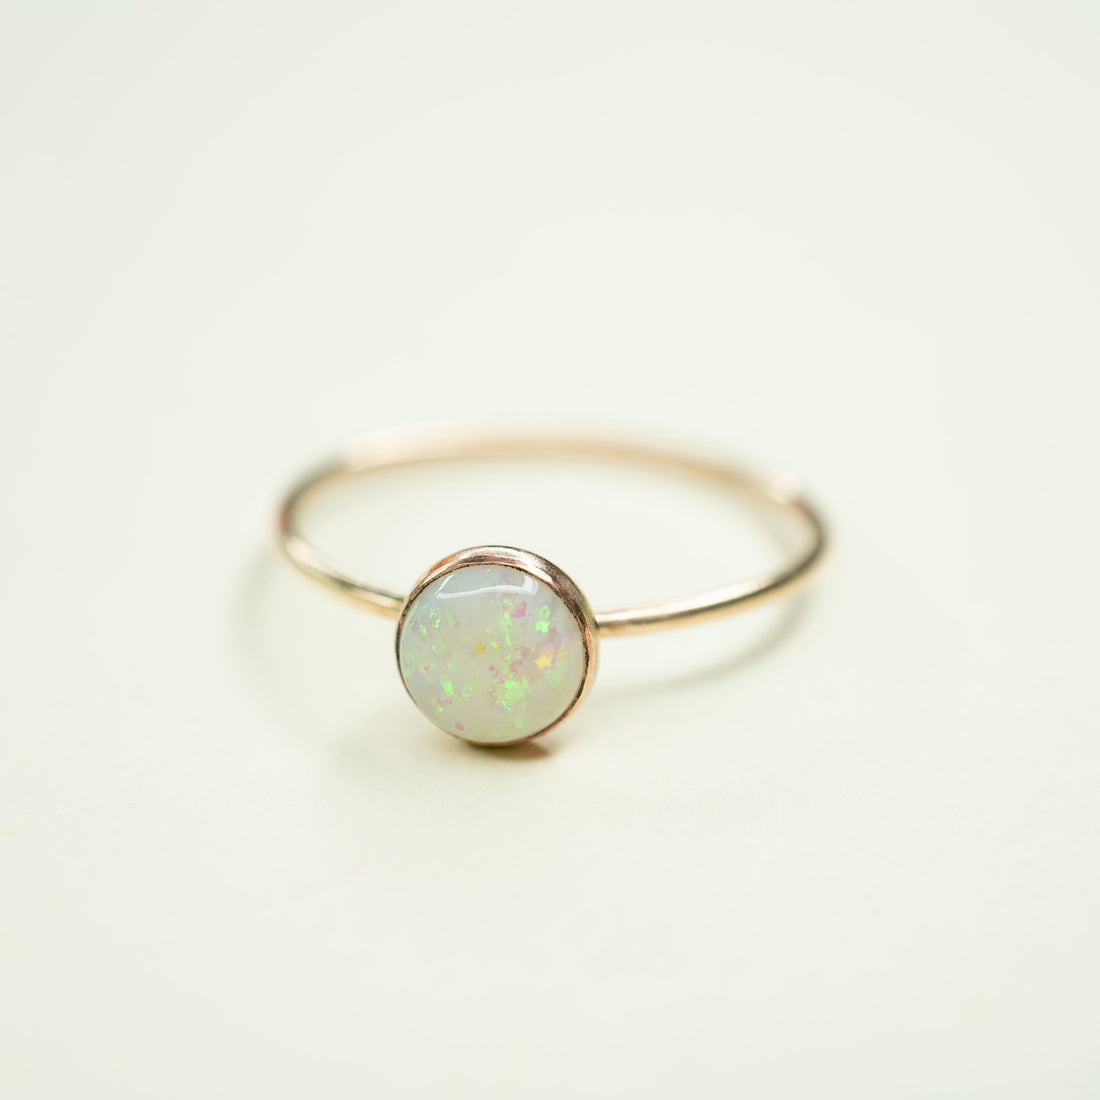 Gold Opal Ring, Gold filled Opal Ring, Natural Opal Ring, Opal Ring, 14k Gold Opal Ring, Handmade Opal Ring, Dainty Opal Ring